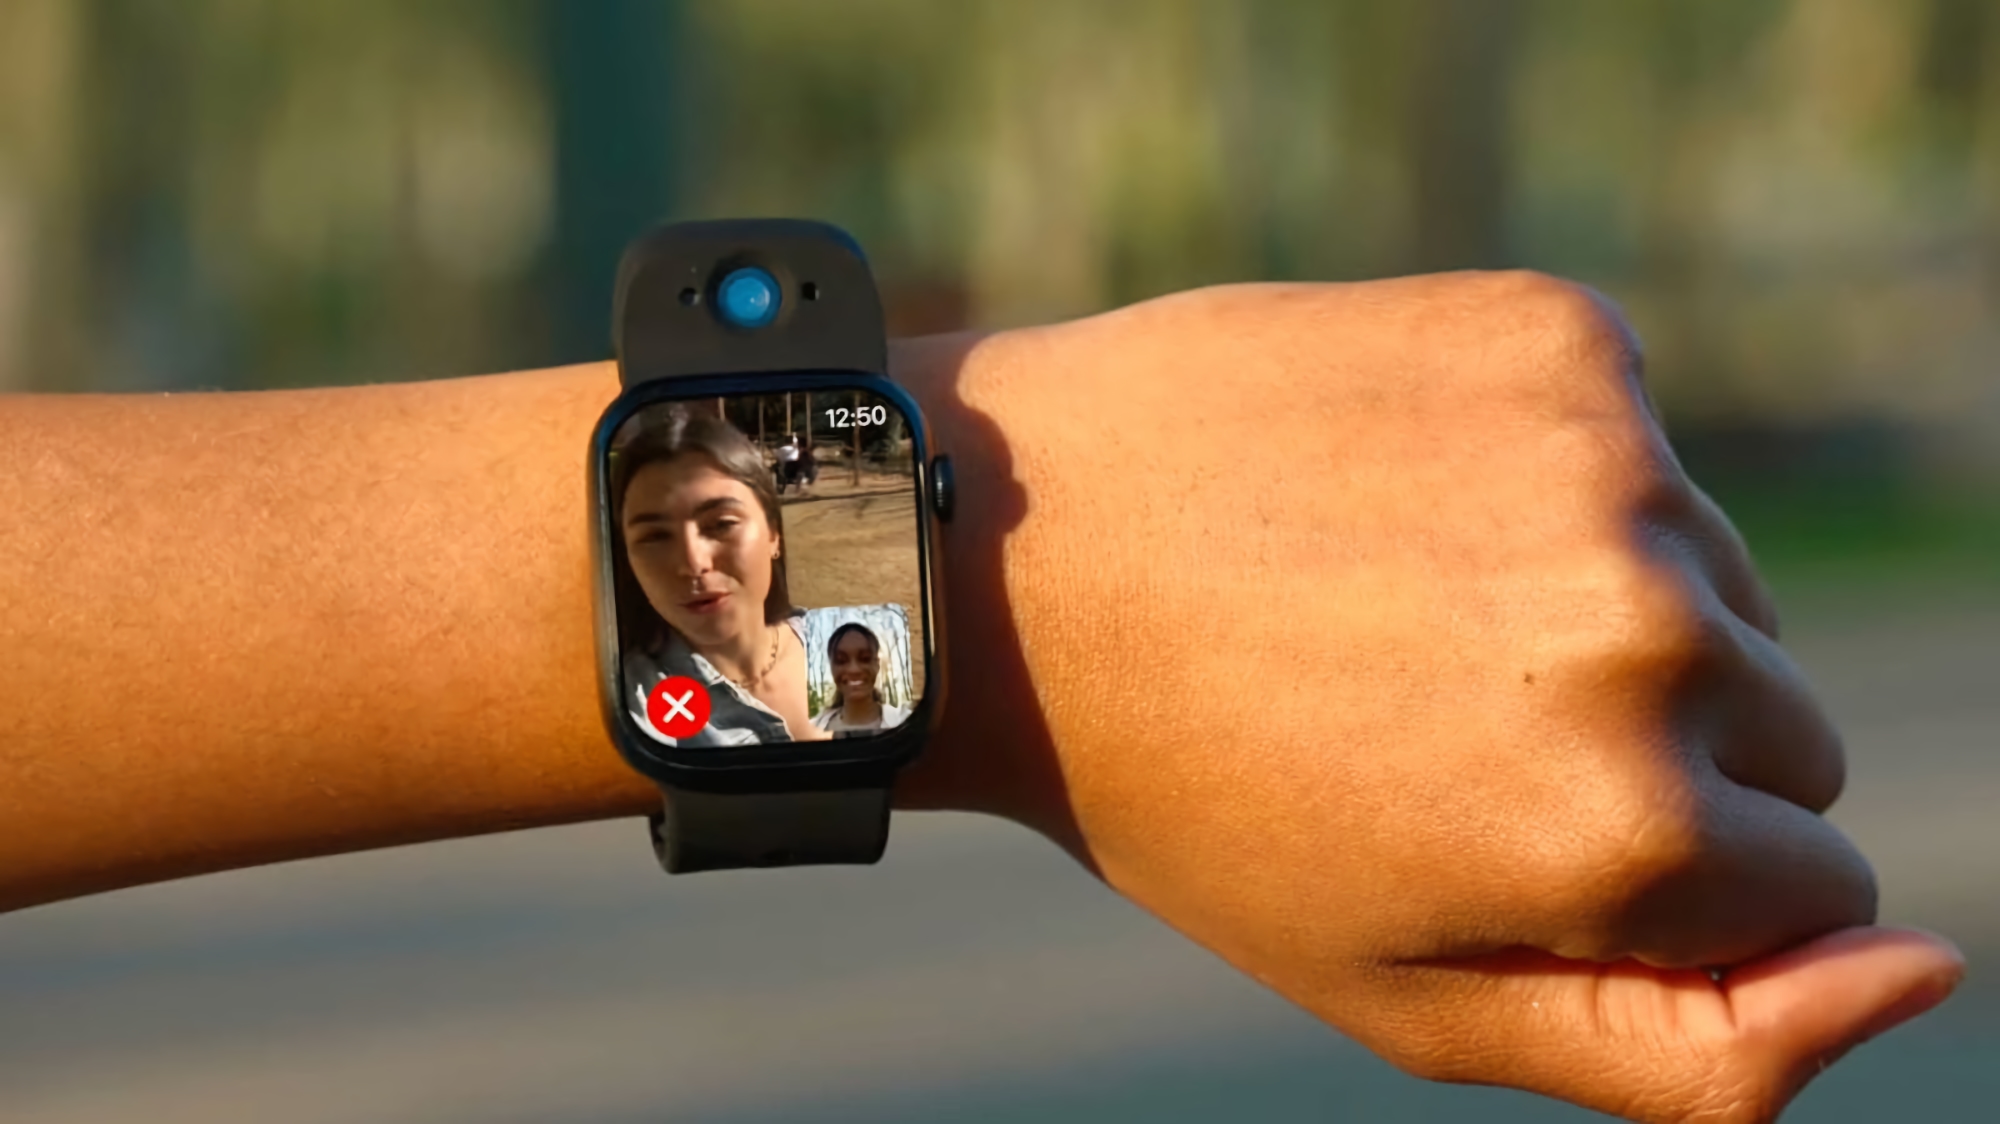 Wristcam adds support for video calls on Apple Watch